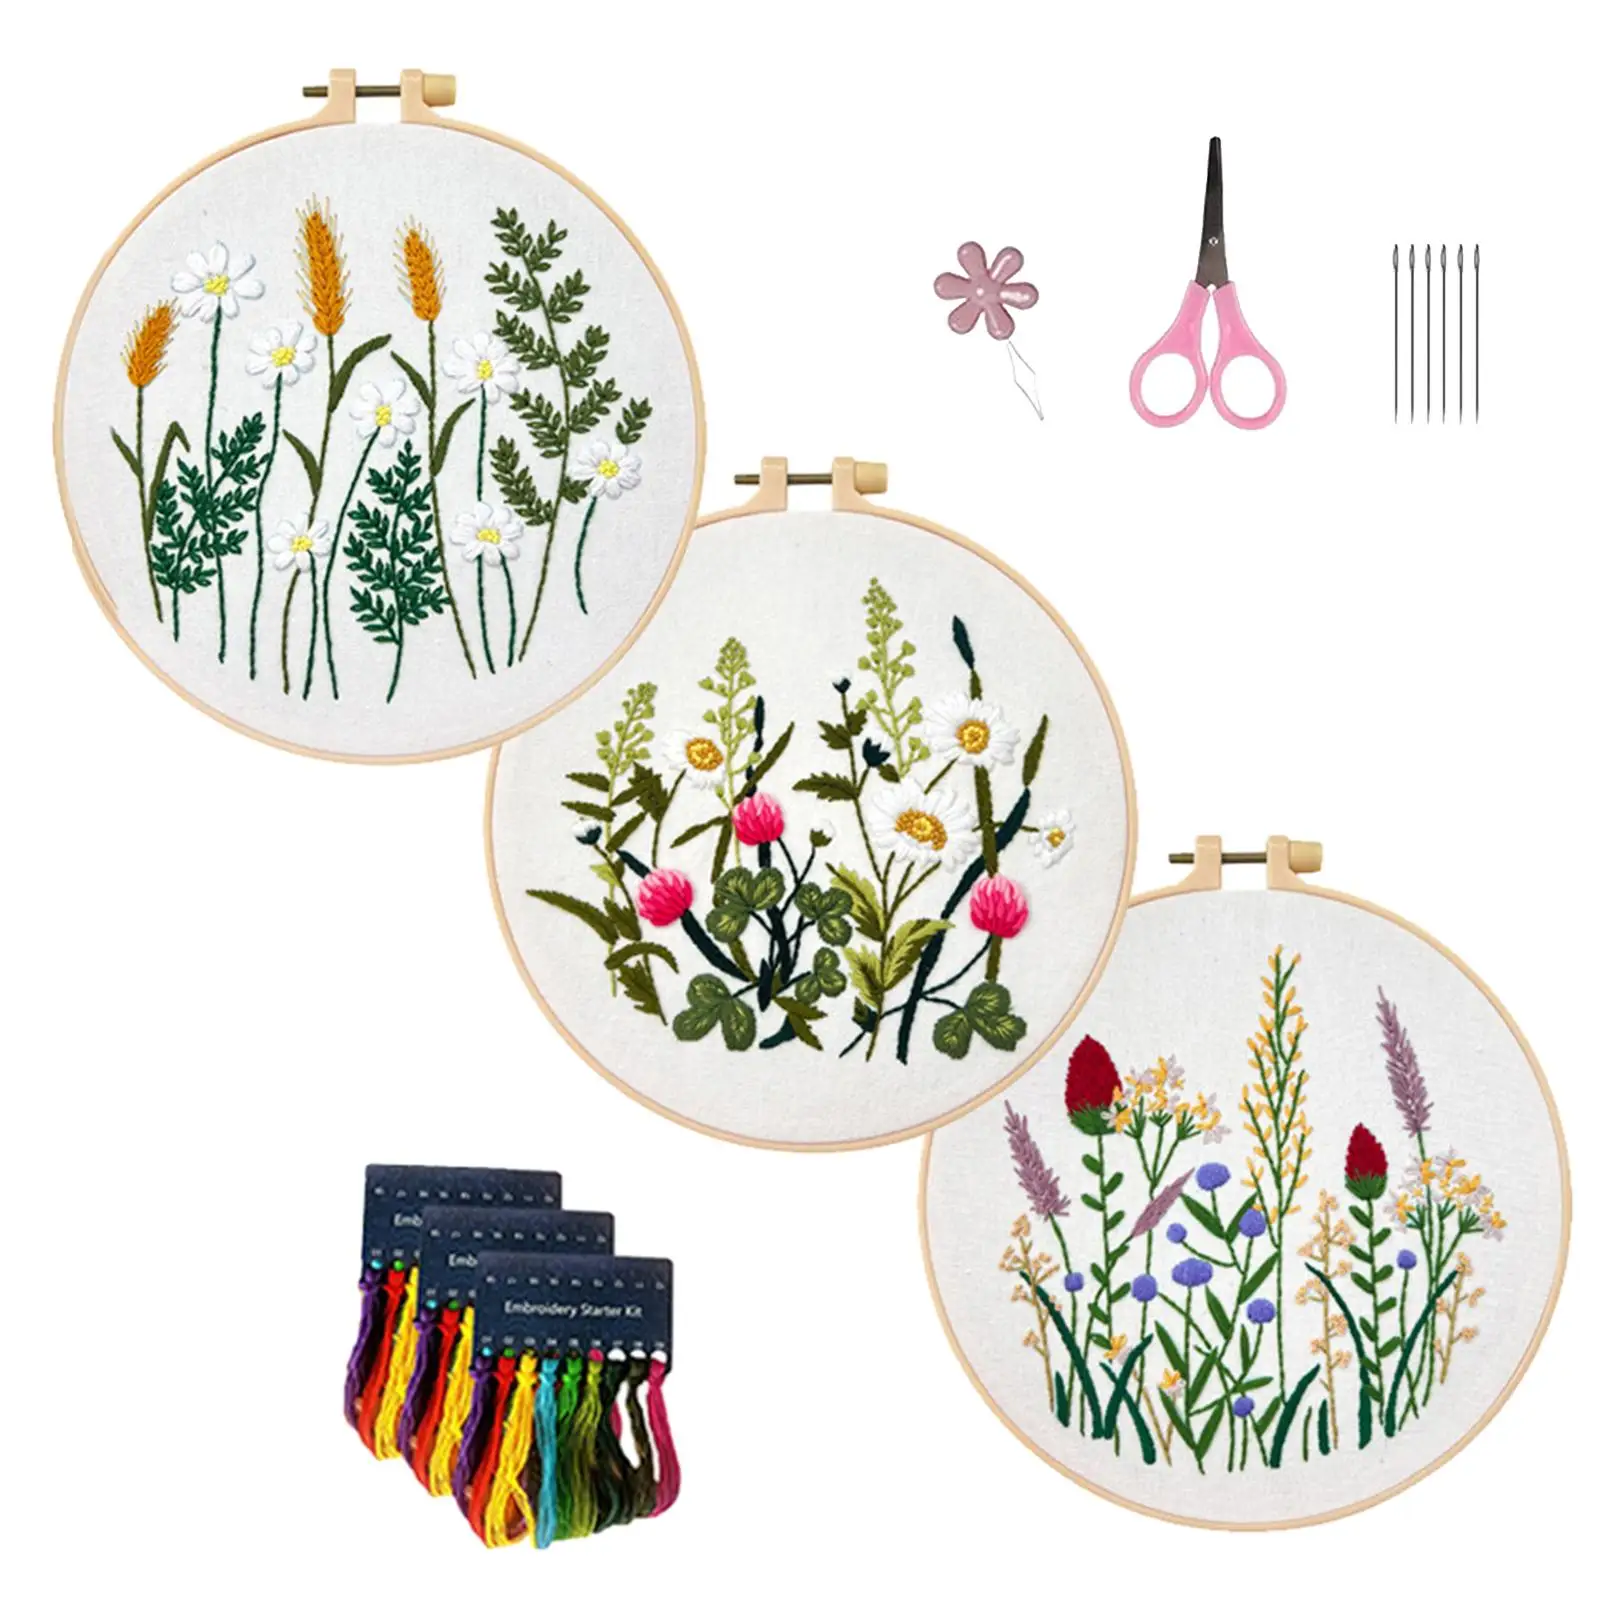 3x Beginner Embroidery Set Embroidery Hoops Coloured Threads Plants Pattern for DIY Art Handcraft Enthusiast Hobbyists Adults